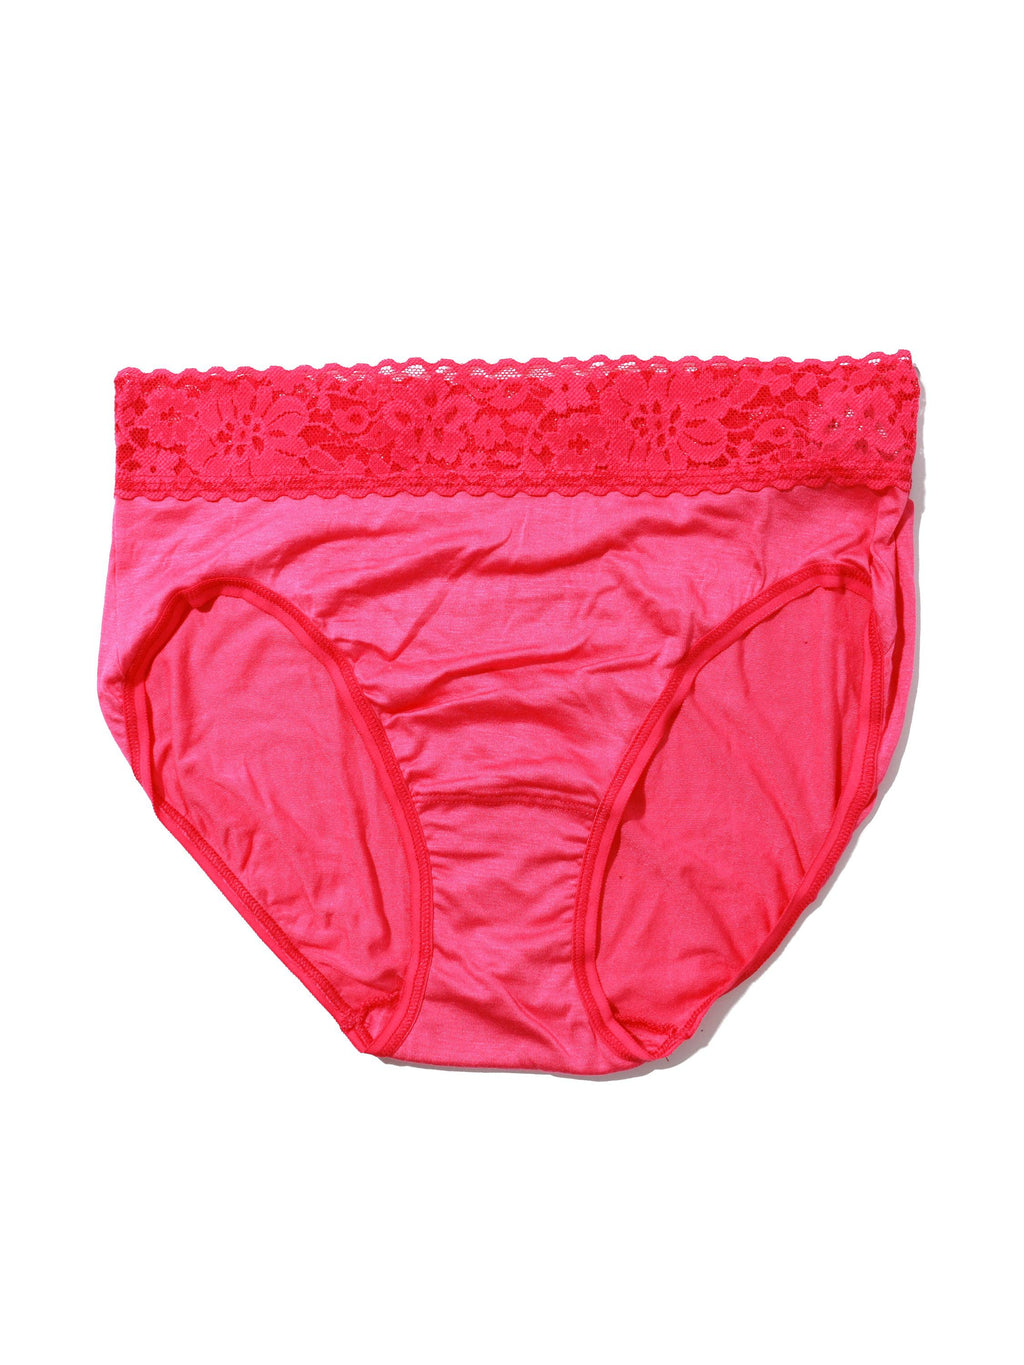 DreamEase™ French Brief Rare Pink | Hanky Panky